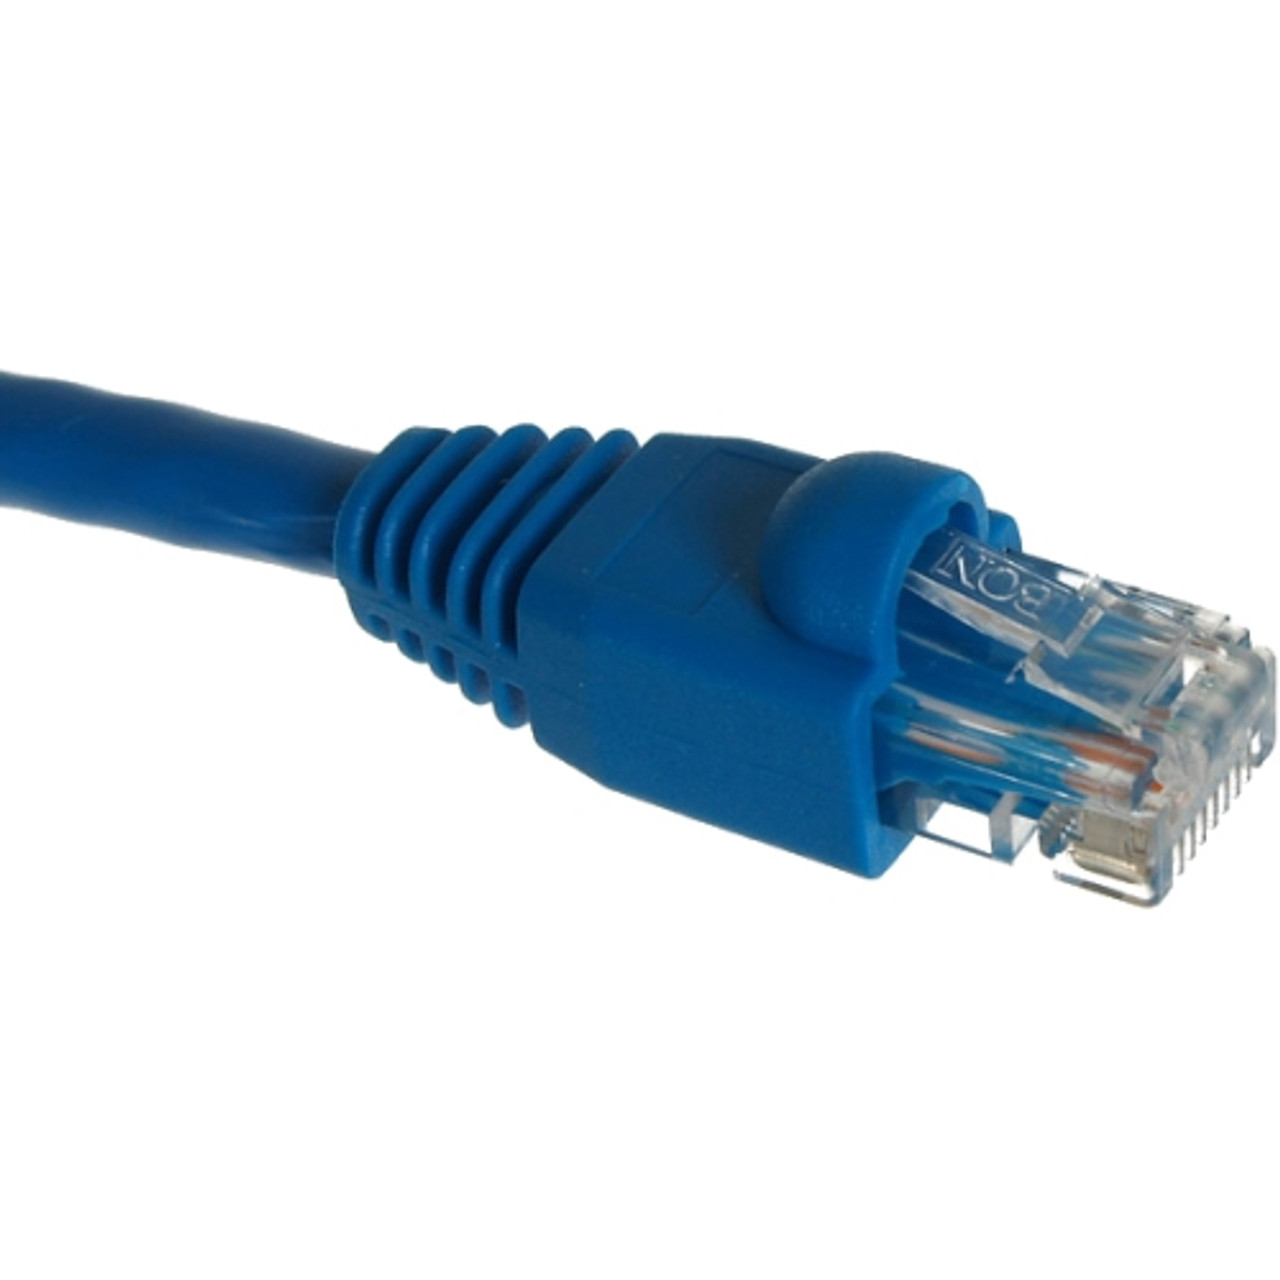 RCW-554 Rosewill RCW-554 10ft. /Network Cable Cat 6 Blue Category 6 for Network Device 10 ft 1 x RJ-45 Male Network 1 x RJ-45 Male Network Gold-plated